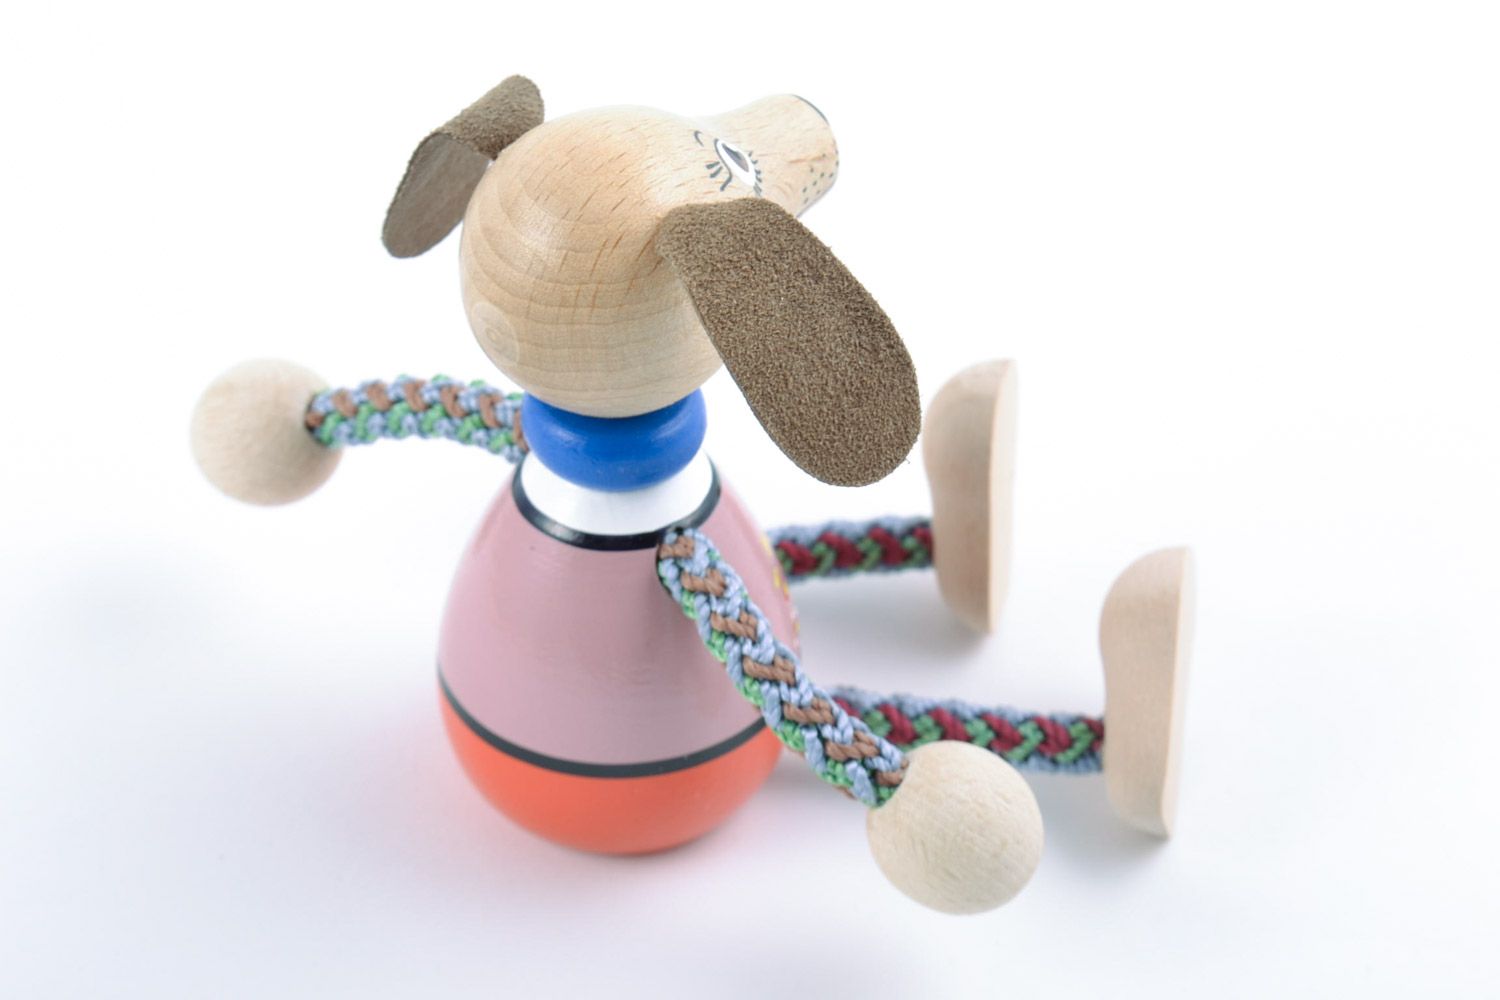 Homemade painted eco friendly wooden toy dog with cord paws for children photo 4